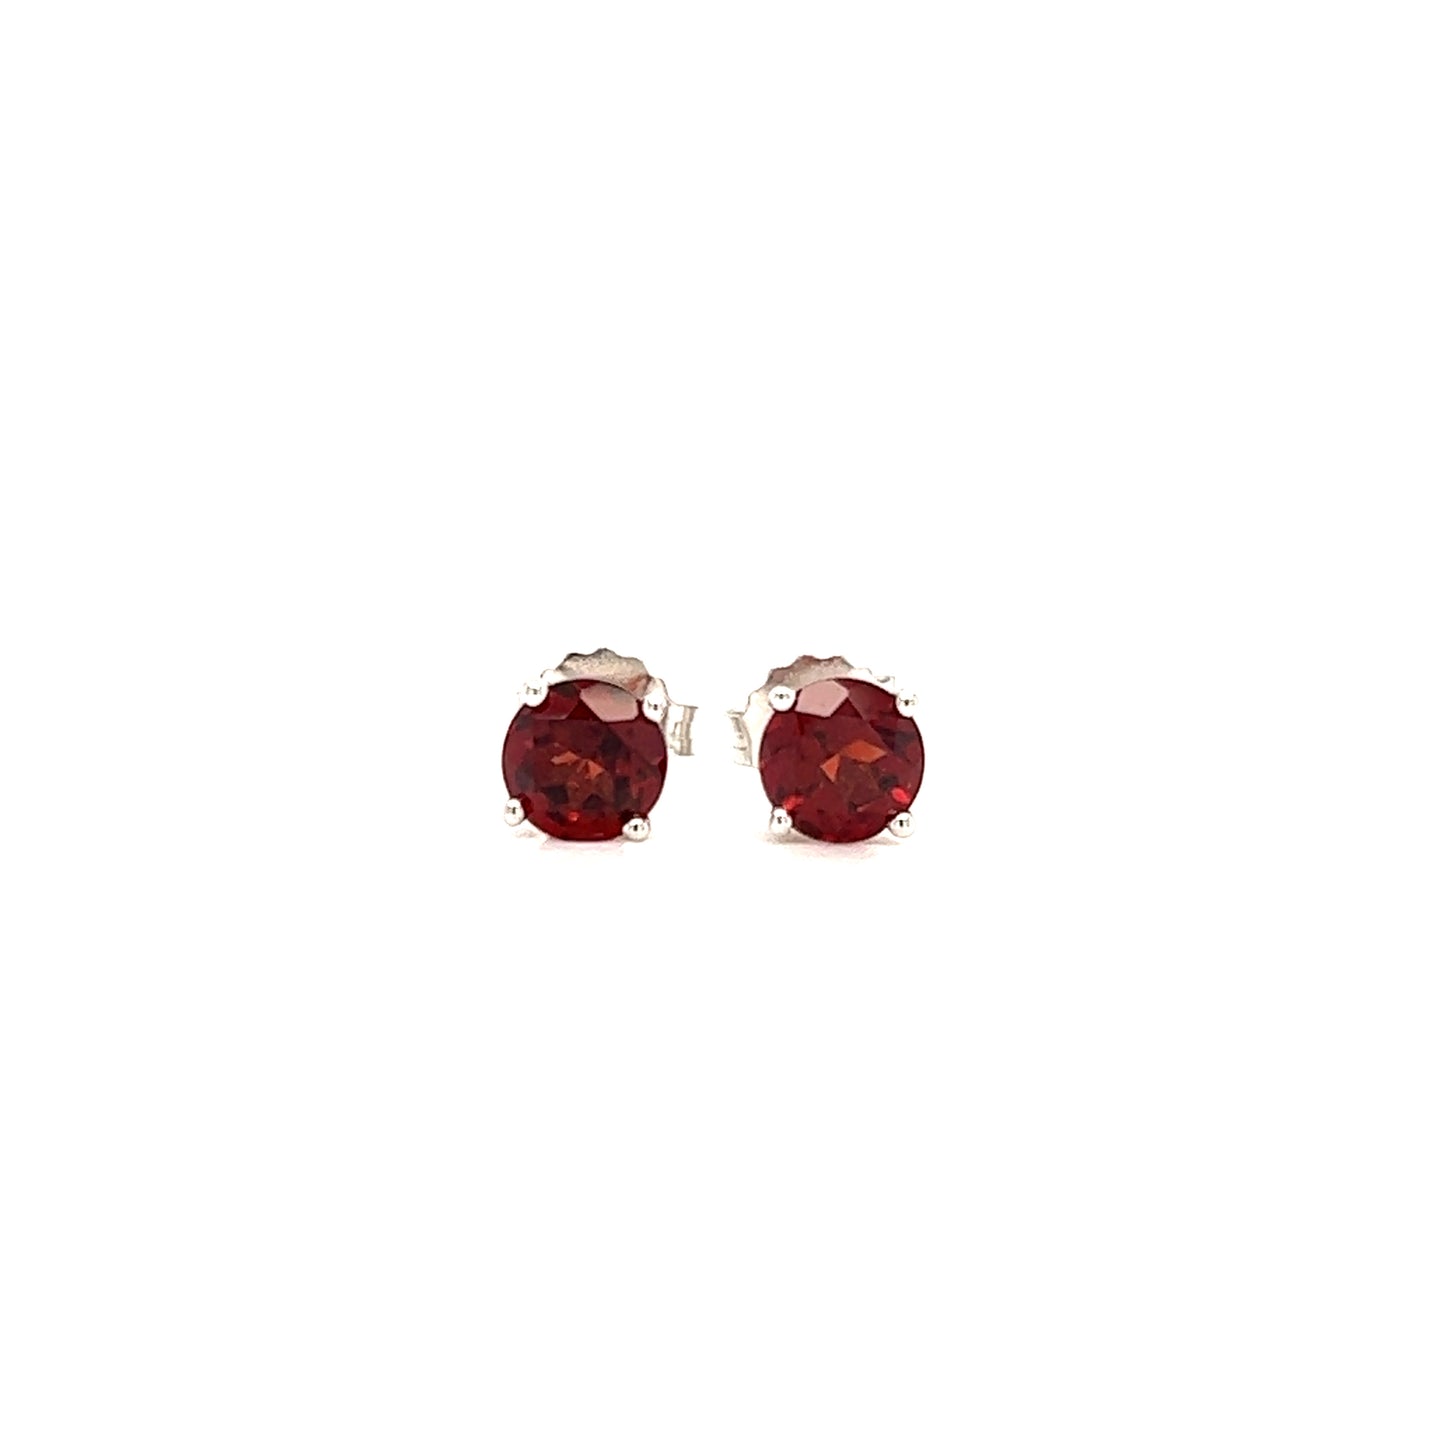 Round Garnet 5mm Stud Earrings in 14K White Gold Front View